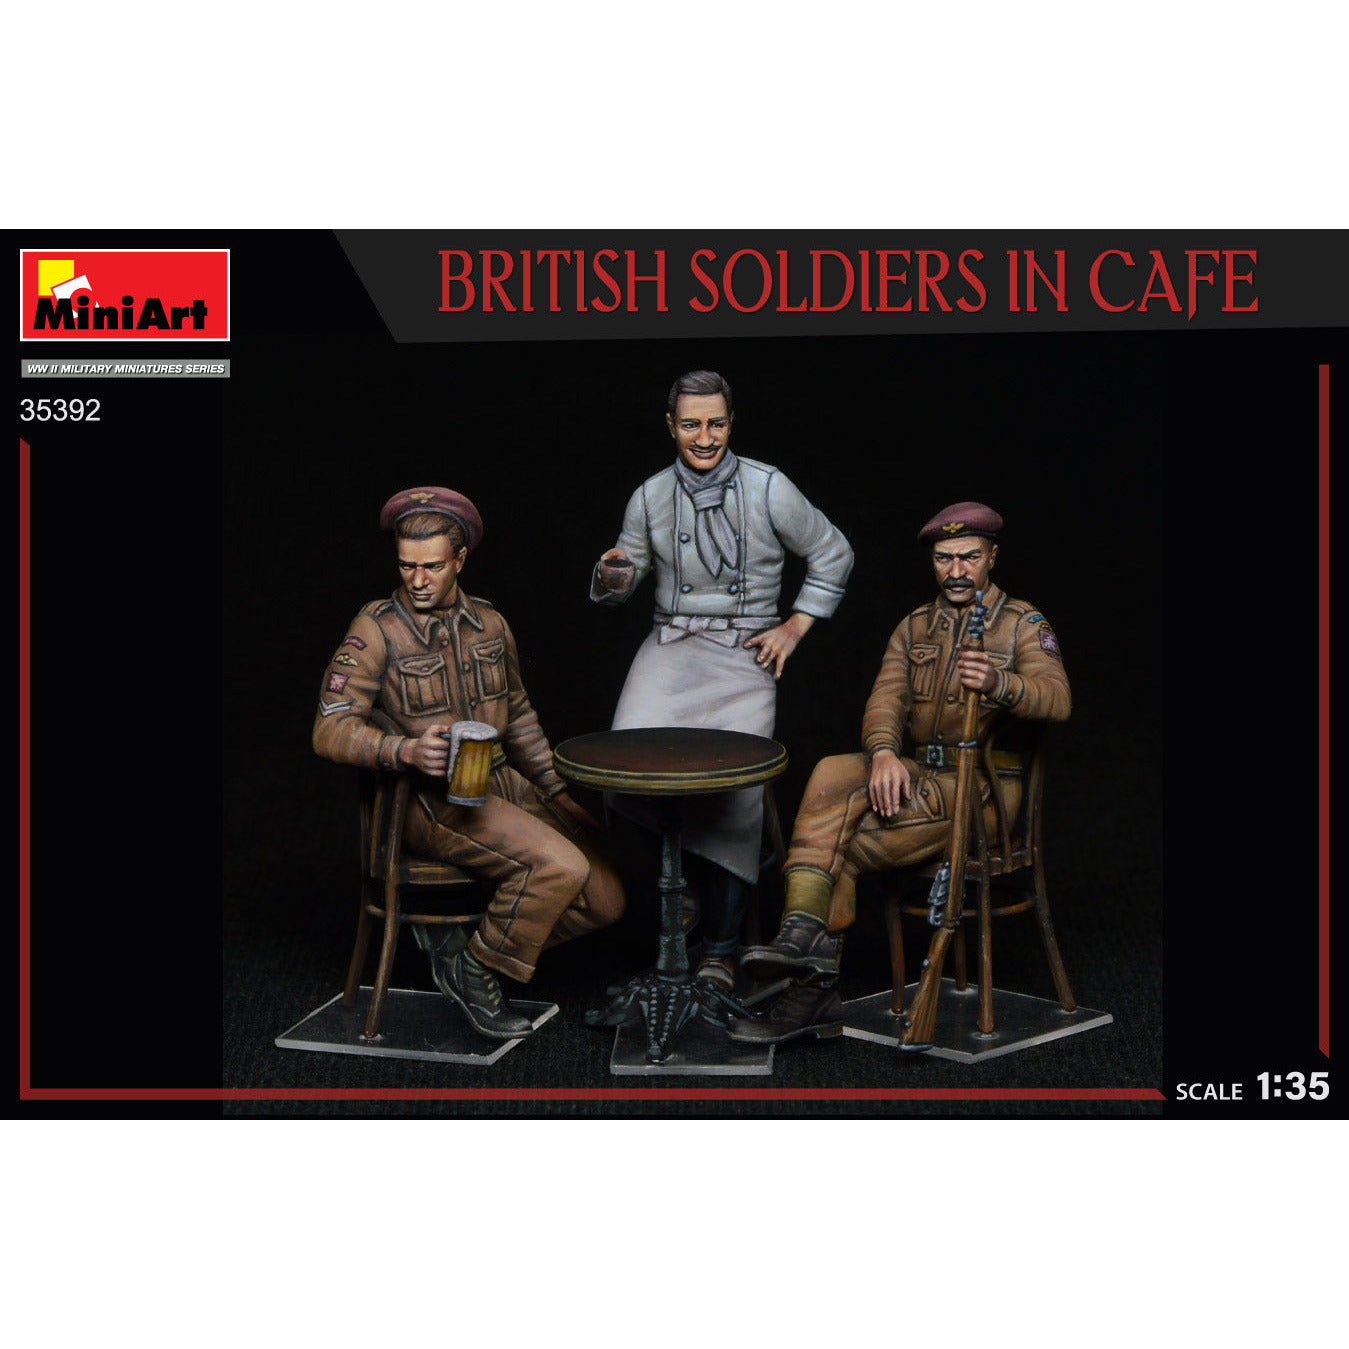 MINIART 1/35 British Soldiers in Cafe